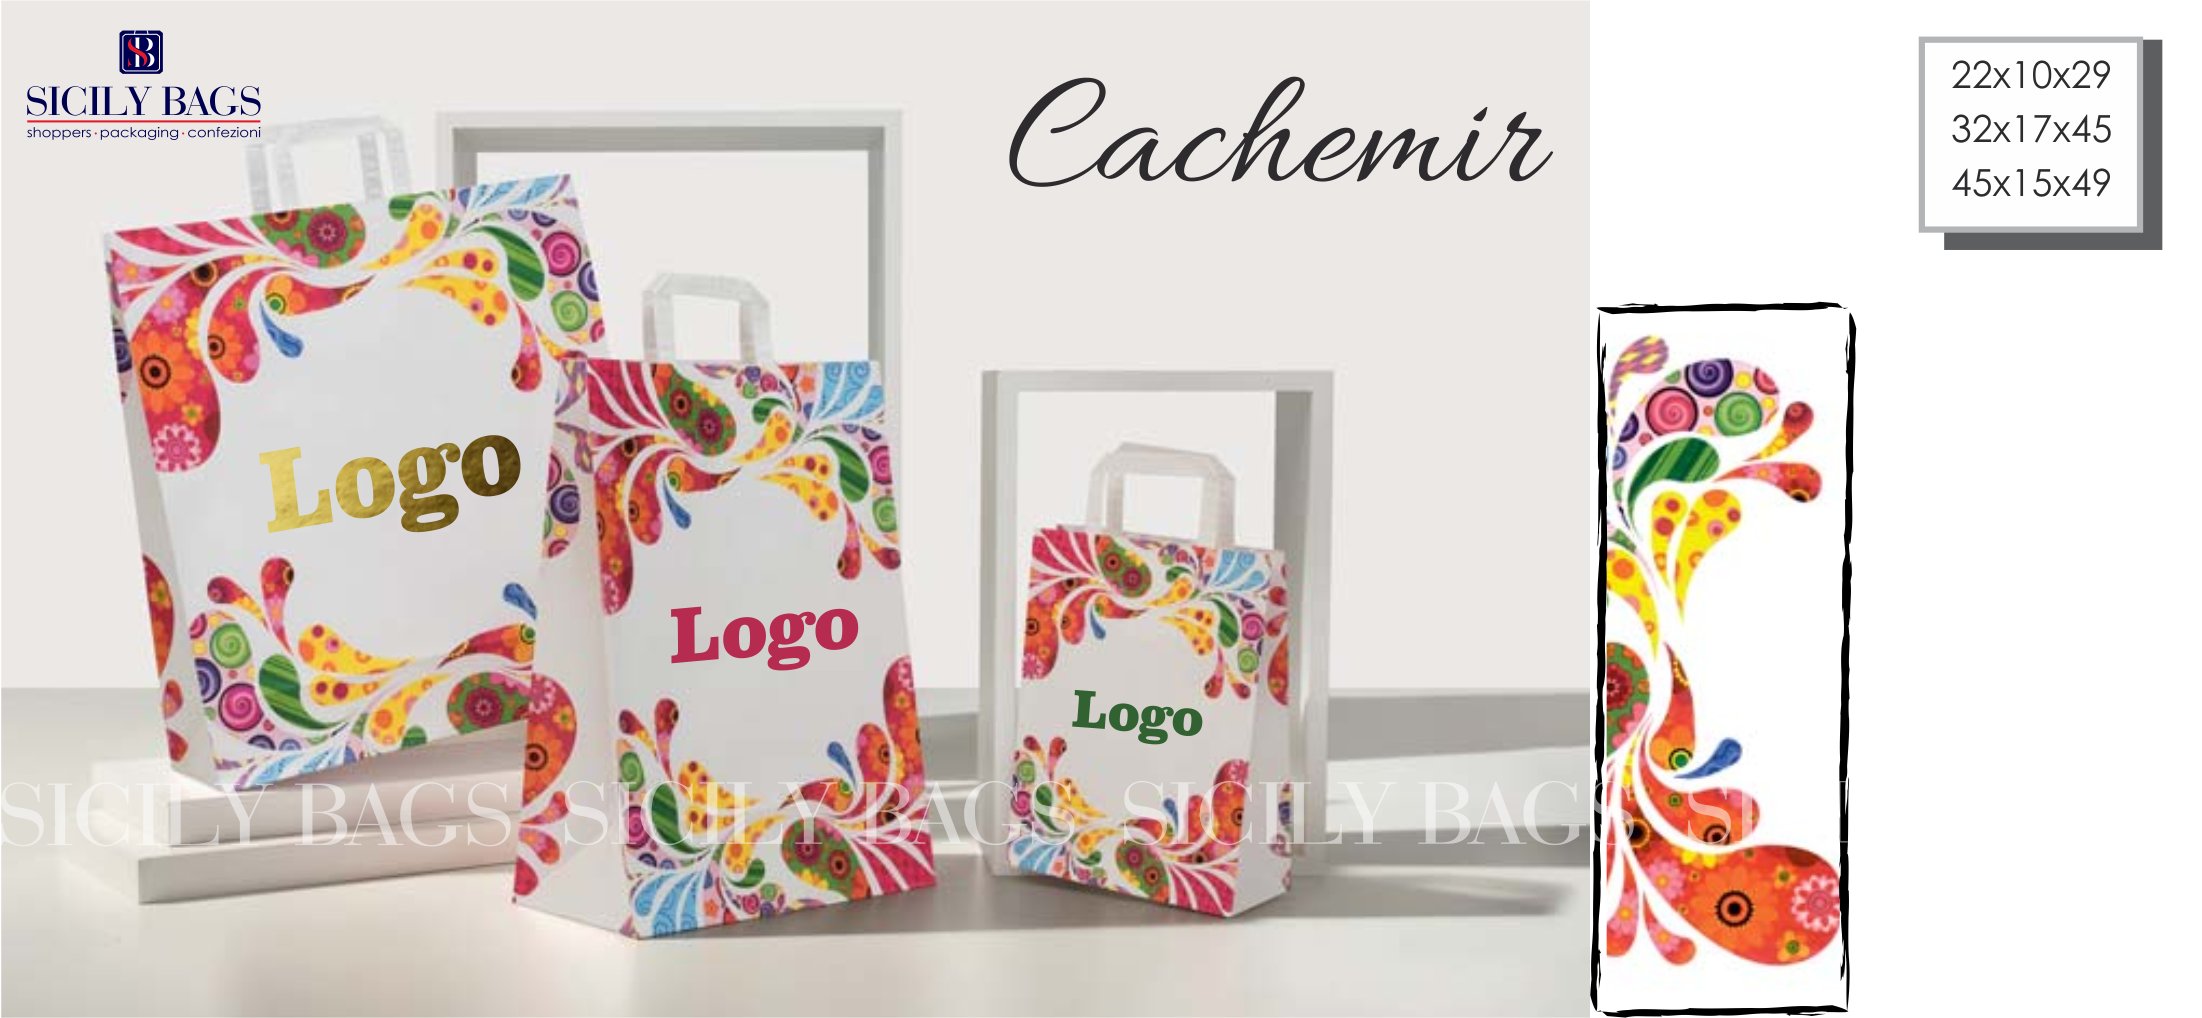 shopper negozi, buste per negozi, shopper, buste in carta, buste personalizzate, stampare buste, sacchetti negozi, borse negozi, buste stampa a caldo, shoppers negozi, shoppers personalizzate, buste con logo, buste per negozi, produttori buste, produttori shoppers, produttori sacchetti, buste colorate, shopper colorate, buste cachemir